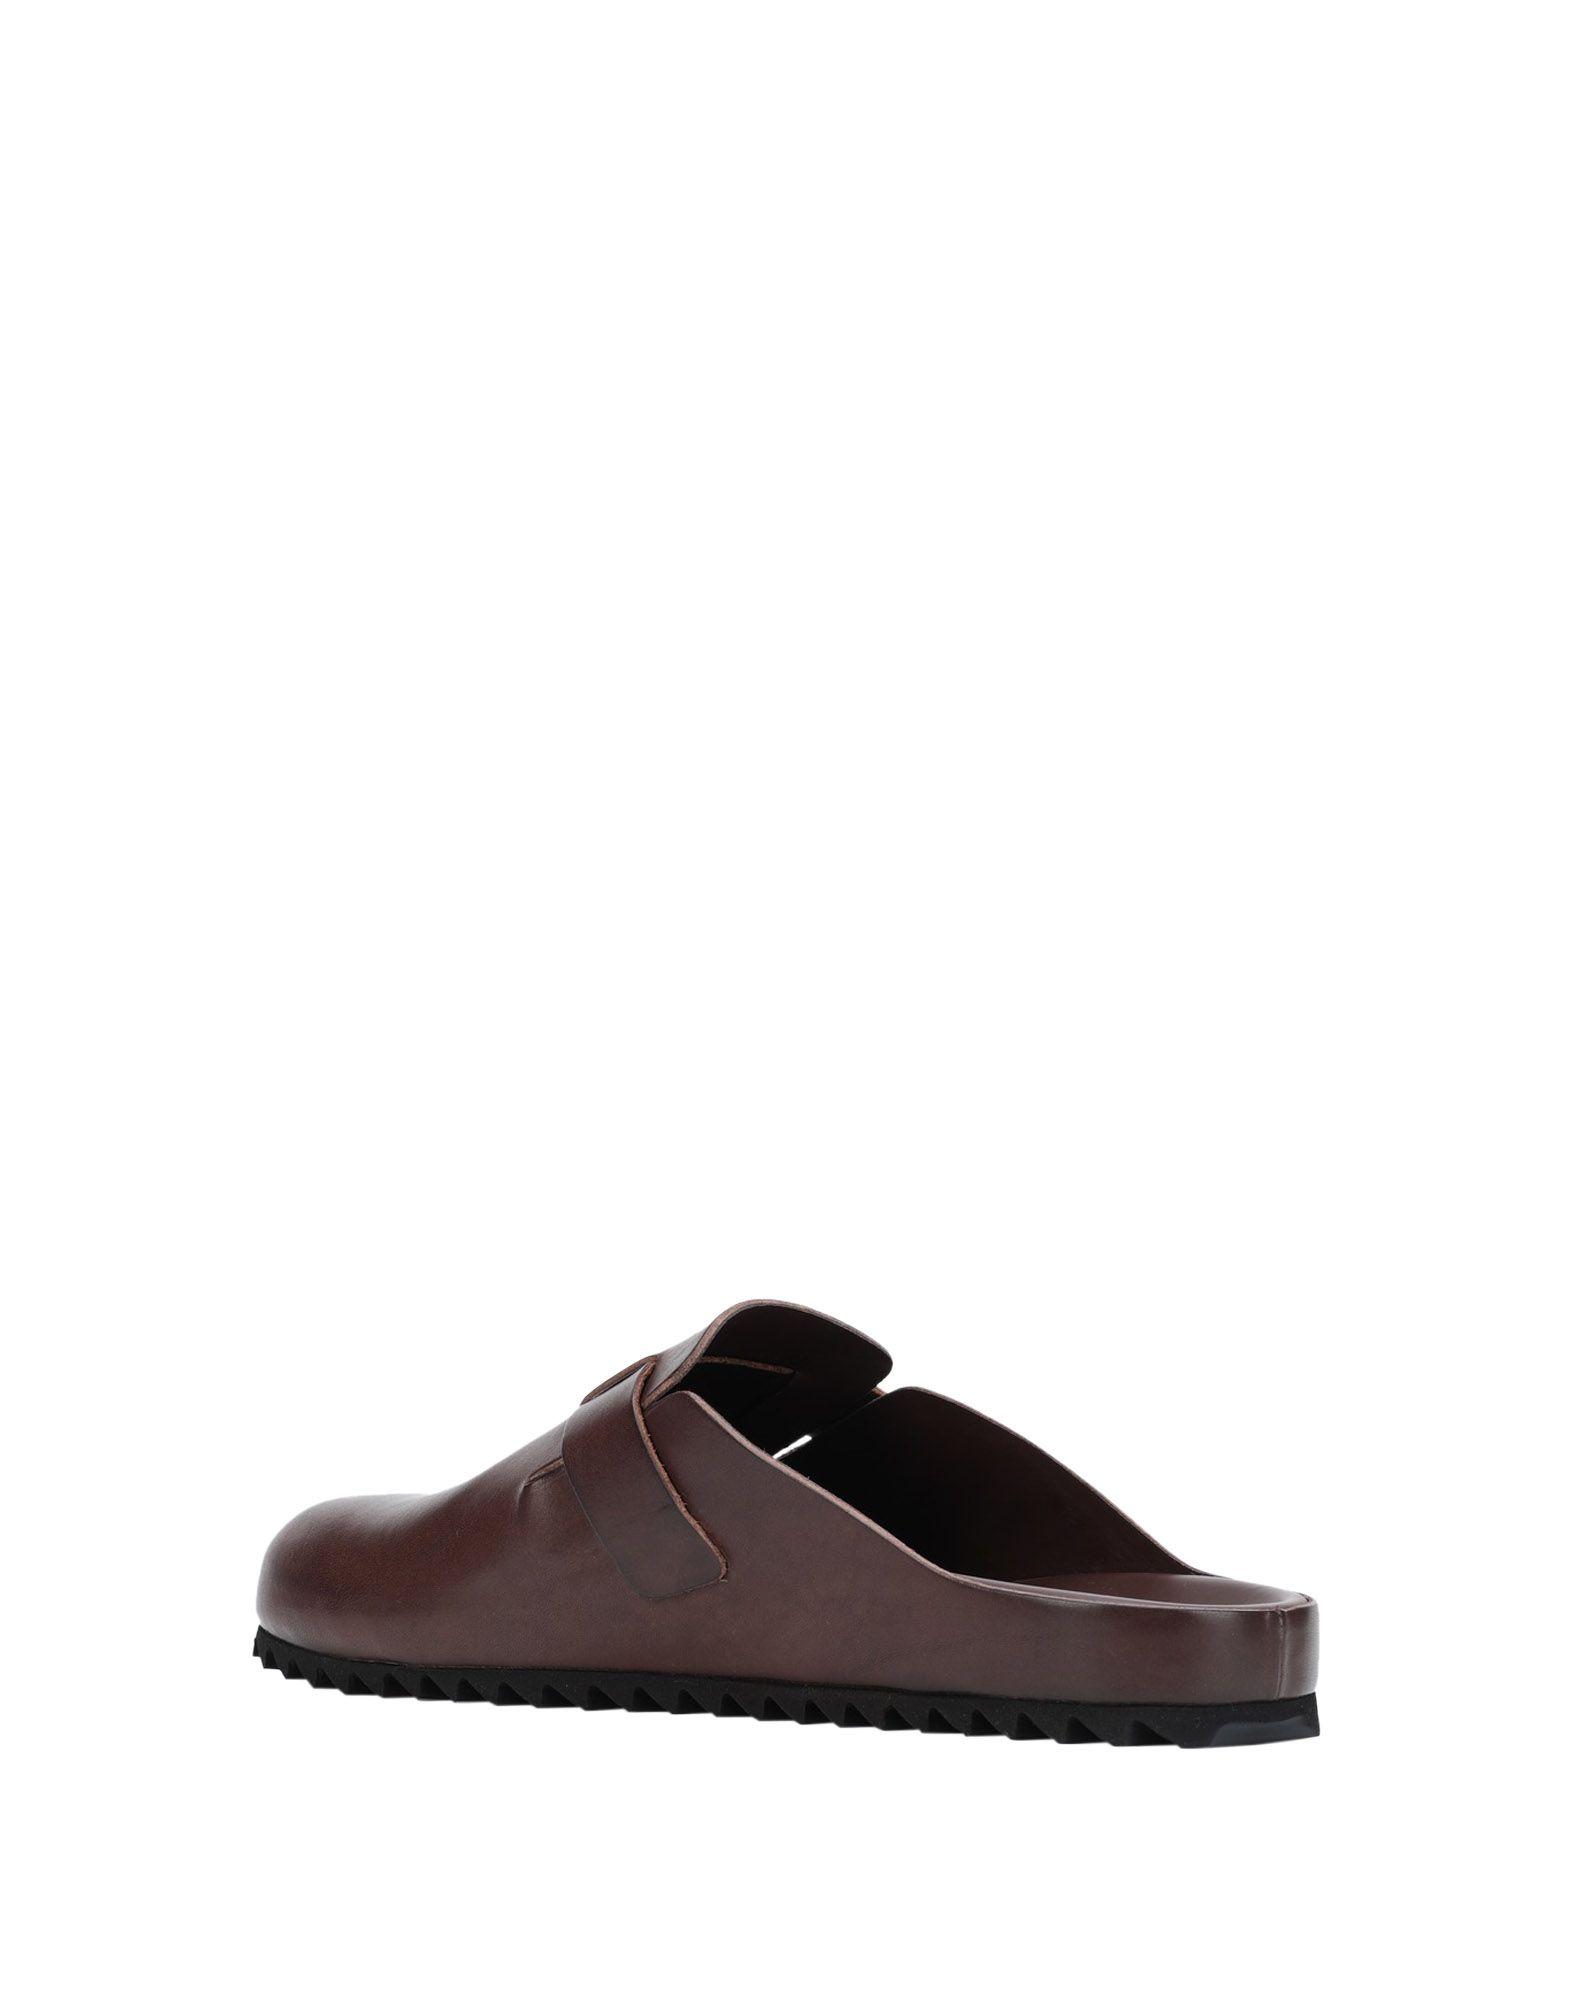 Officine Creative Leather Mules in Dark Brown (Brown) for Men - Lyst